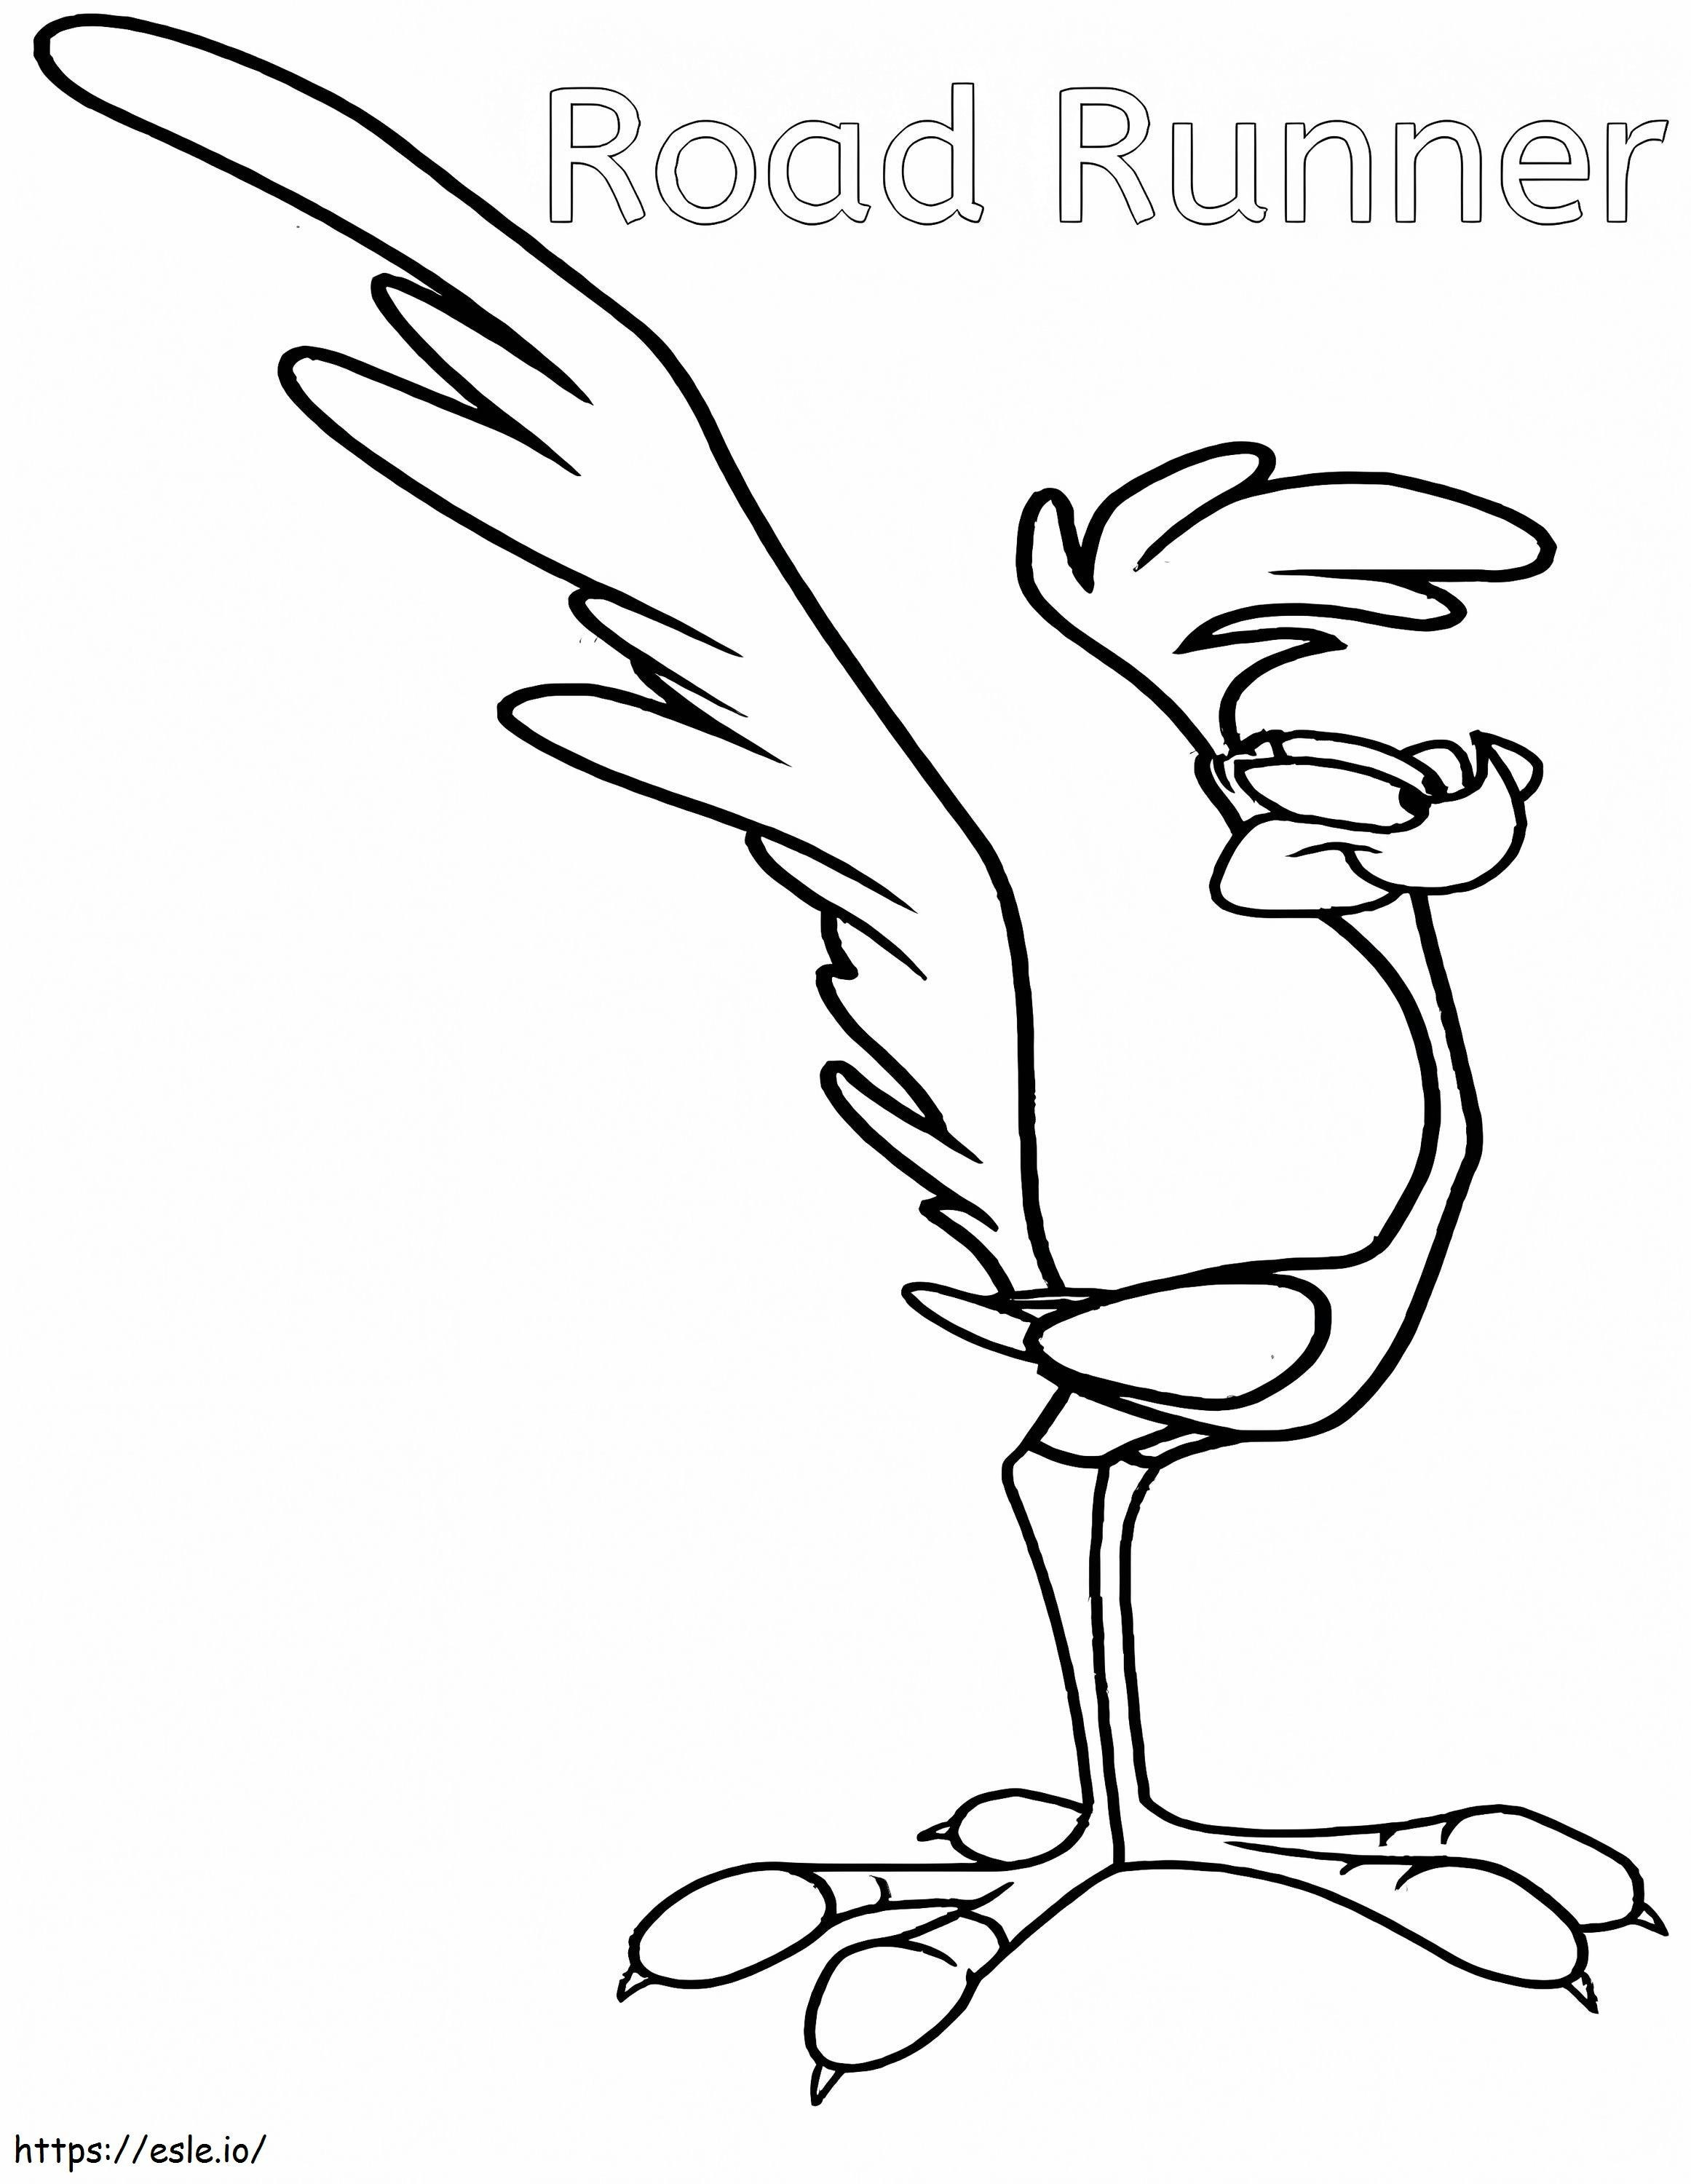 Basic Road Runner coloring page